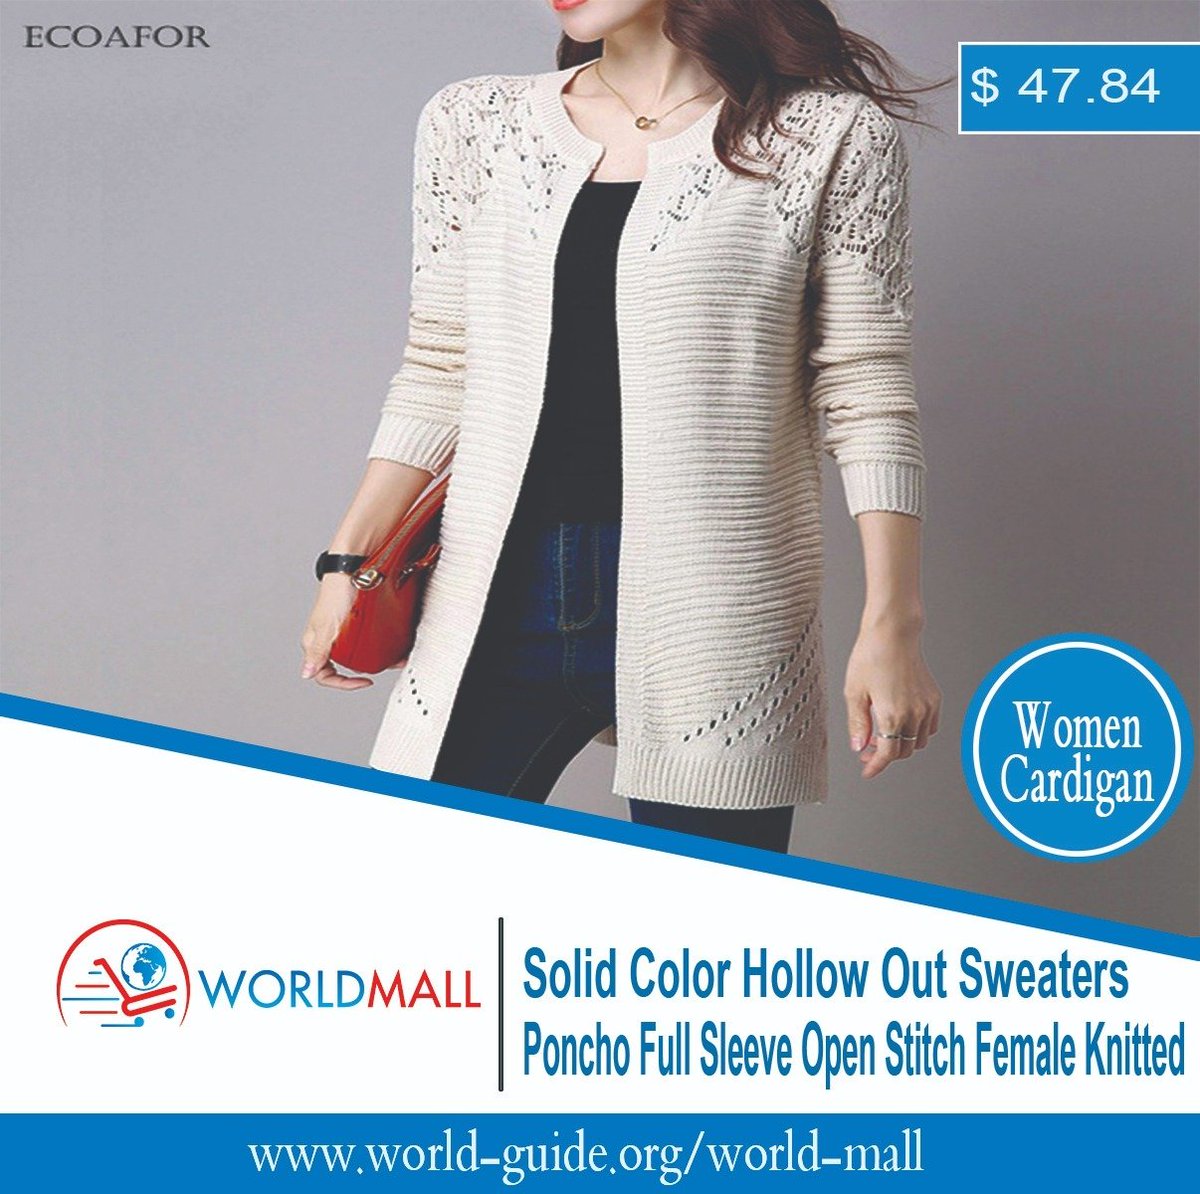 Fall Women Cardigan Solid Color Hollow Out Sweaters Size S-XXL Poncho Full Sleeve Open Stitch Female Knitted Outerwear
To Buy world-guide.org/world-mall/fal…
To See More world-guide.org/world-mall/

#World_Mall #cardigan #America #NewYorkCity #Australia 
#onlinestore #online  #fullsleeve